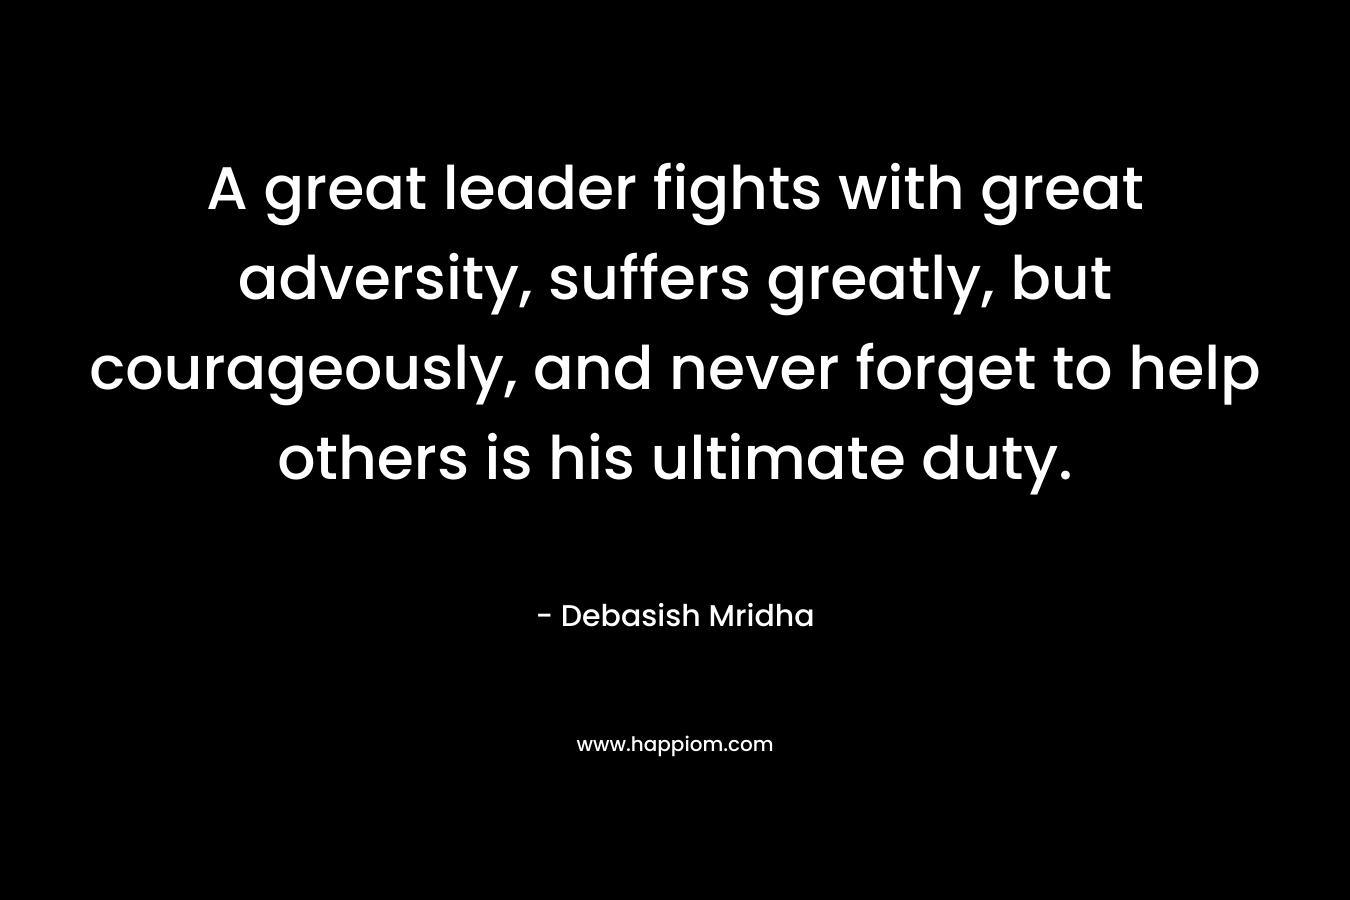 A great leader fights with great adversity, suffers greatly, but courageously, and never forget to help others is his ultimate duty.